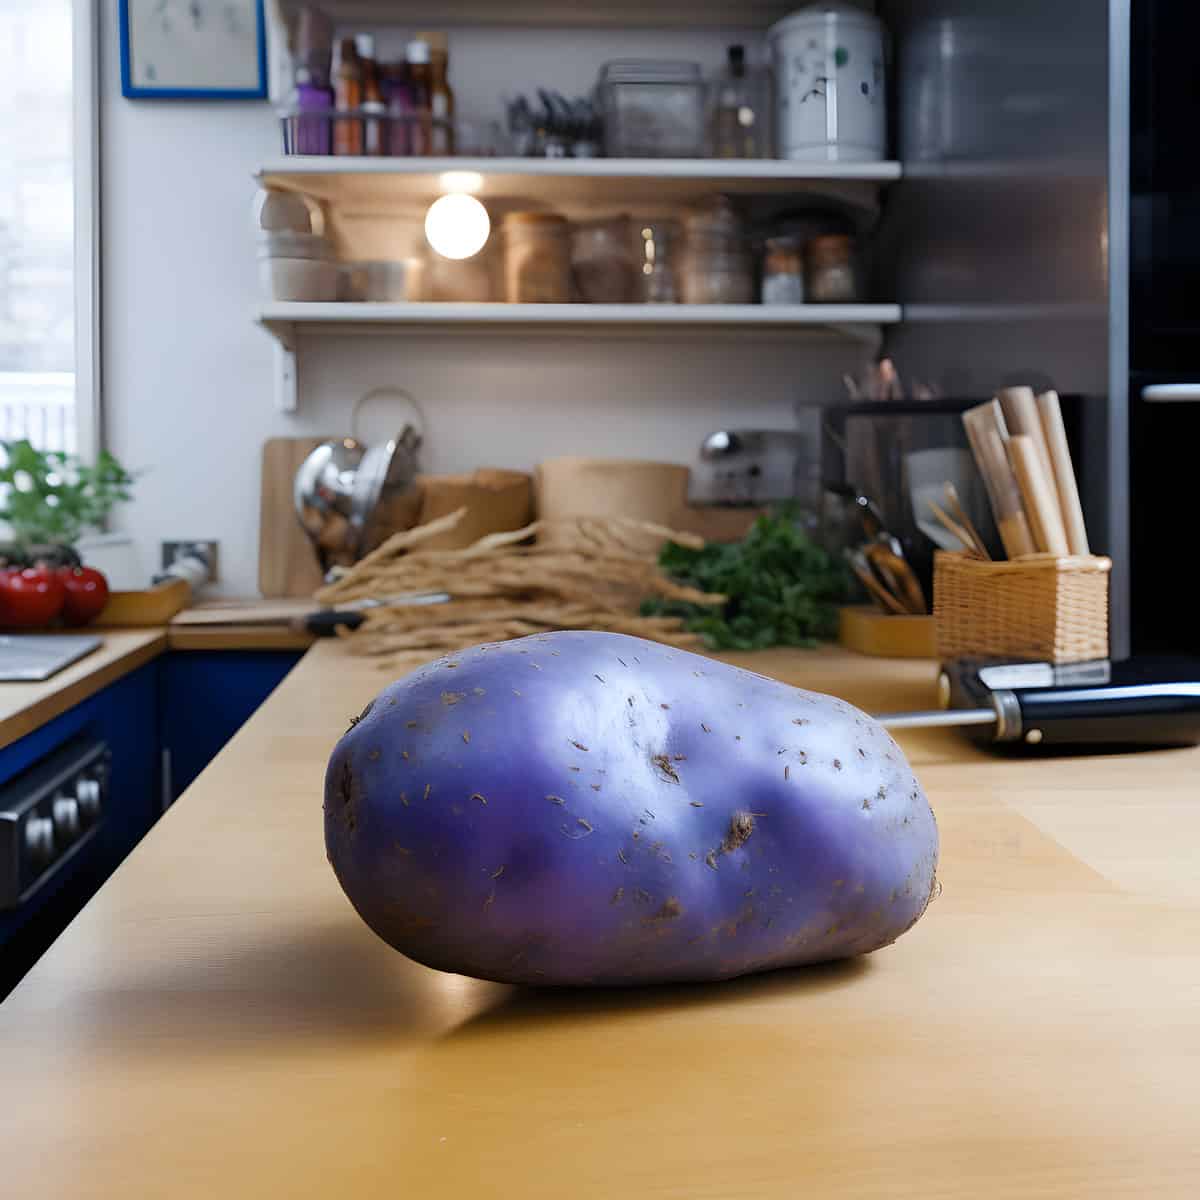 Holtgaster Blaue Potatoes on a kitchen counter